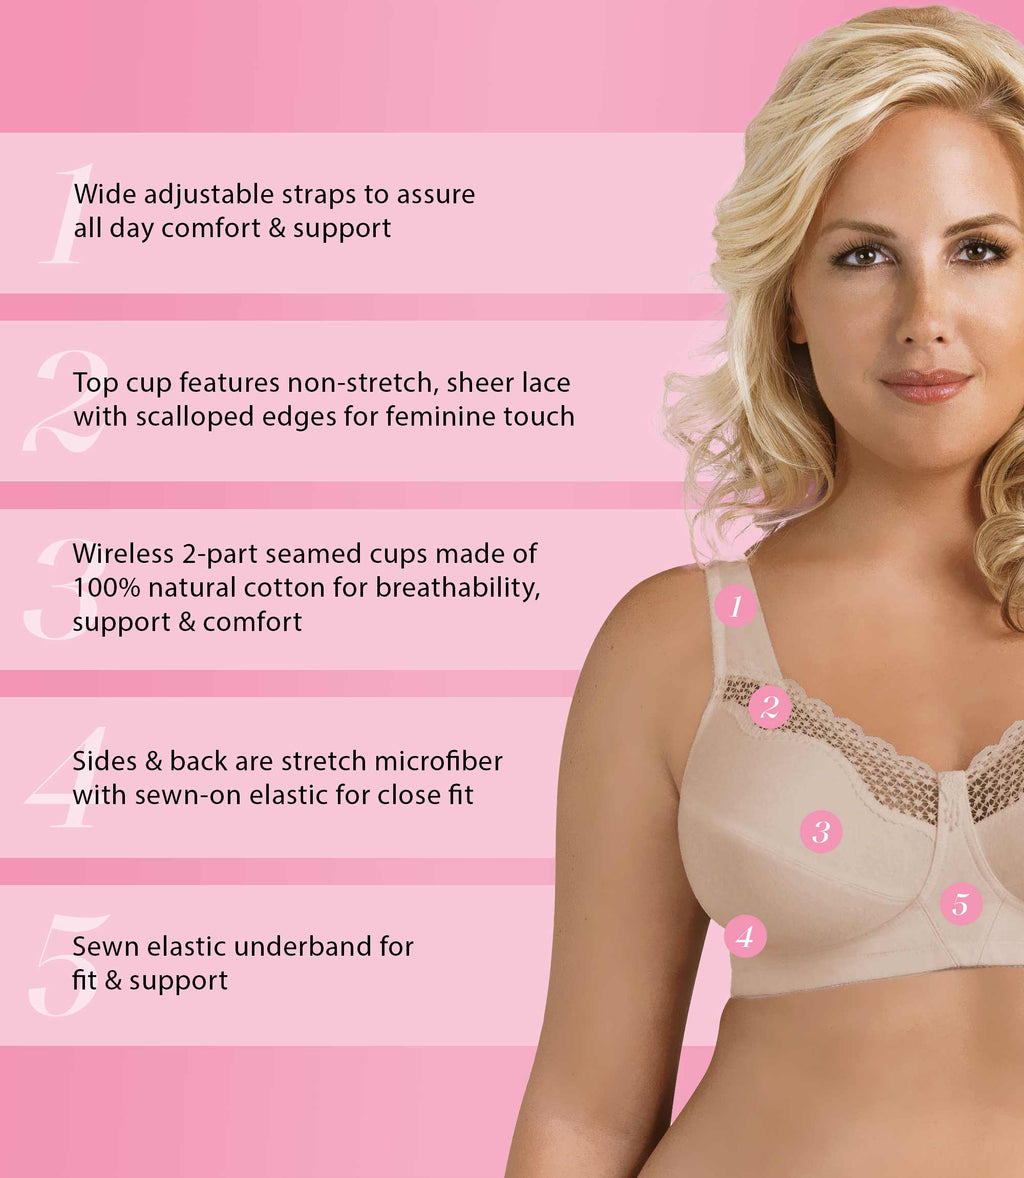 Women Gathered Bra Cotton Soft And Comfortable Thin Mold Cup